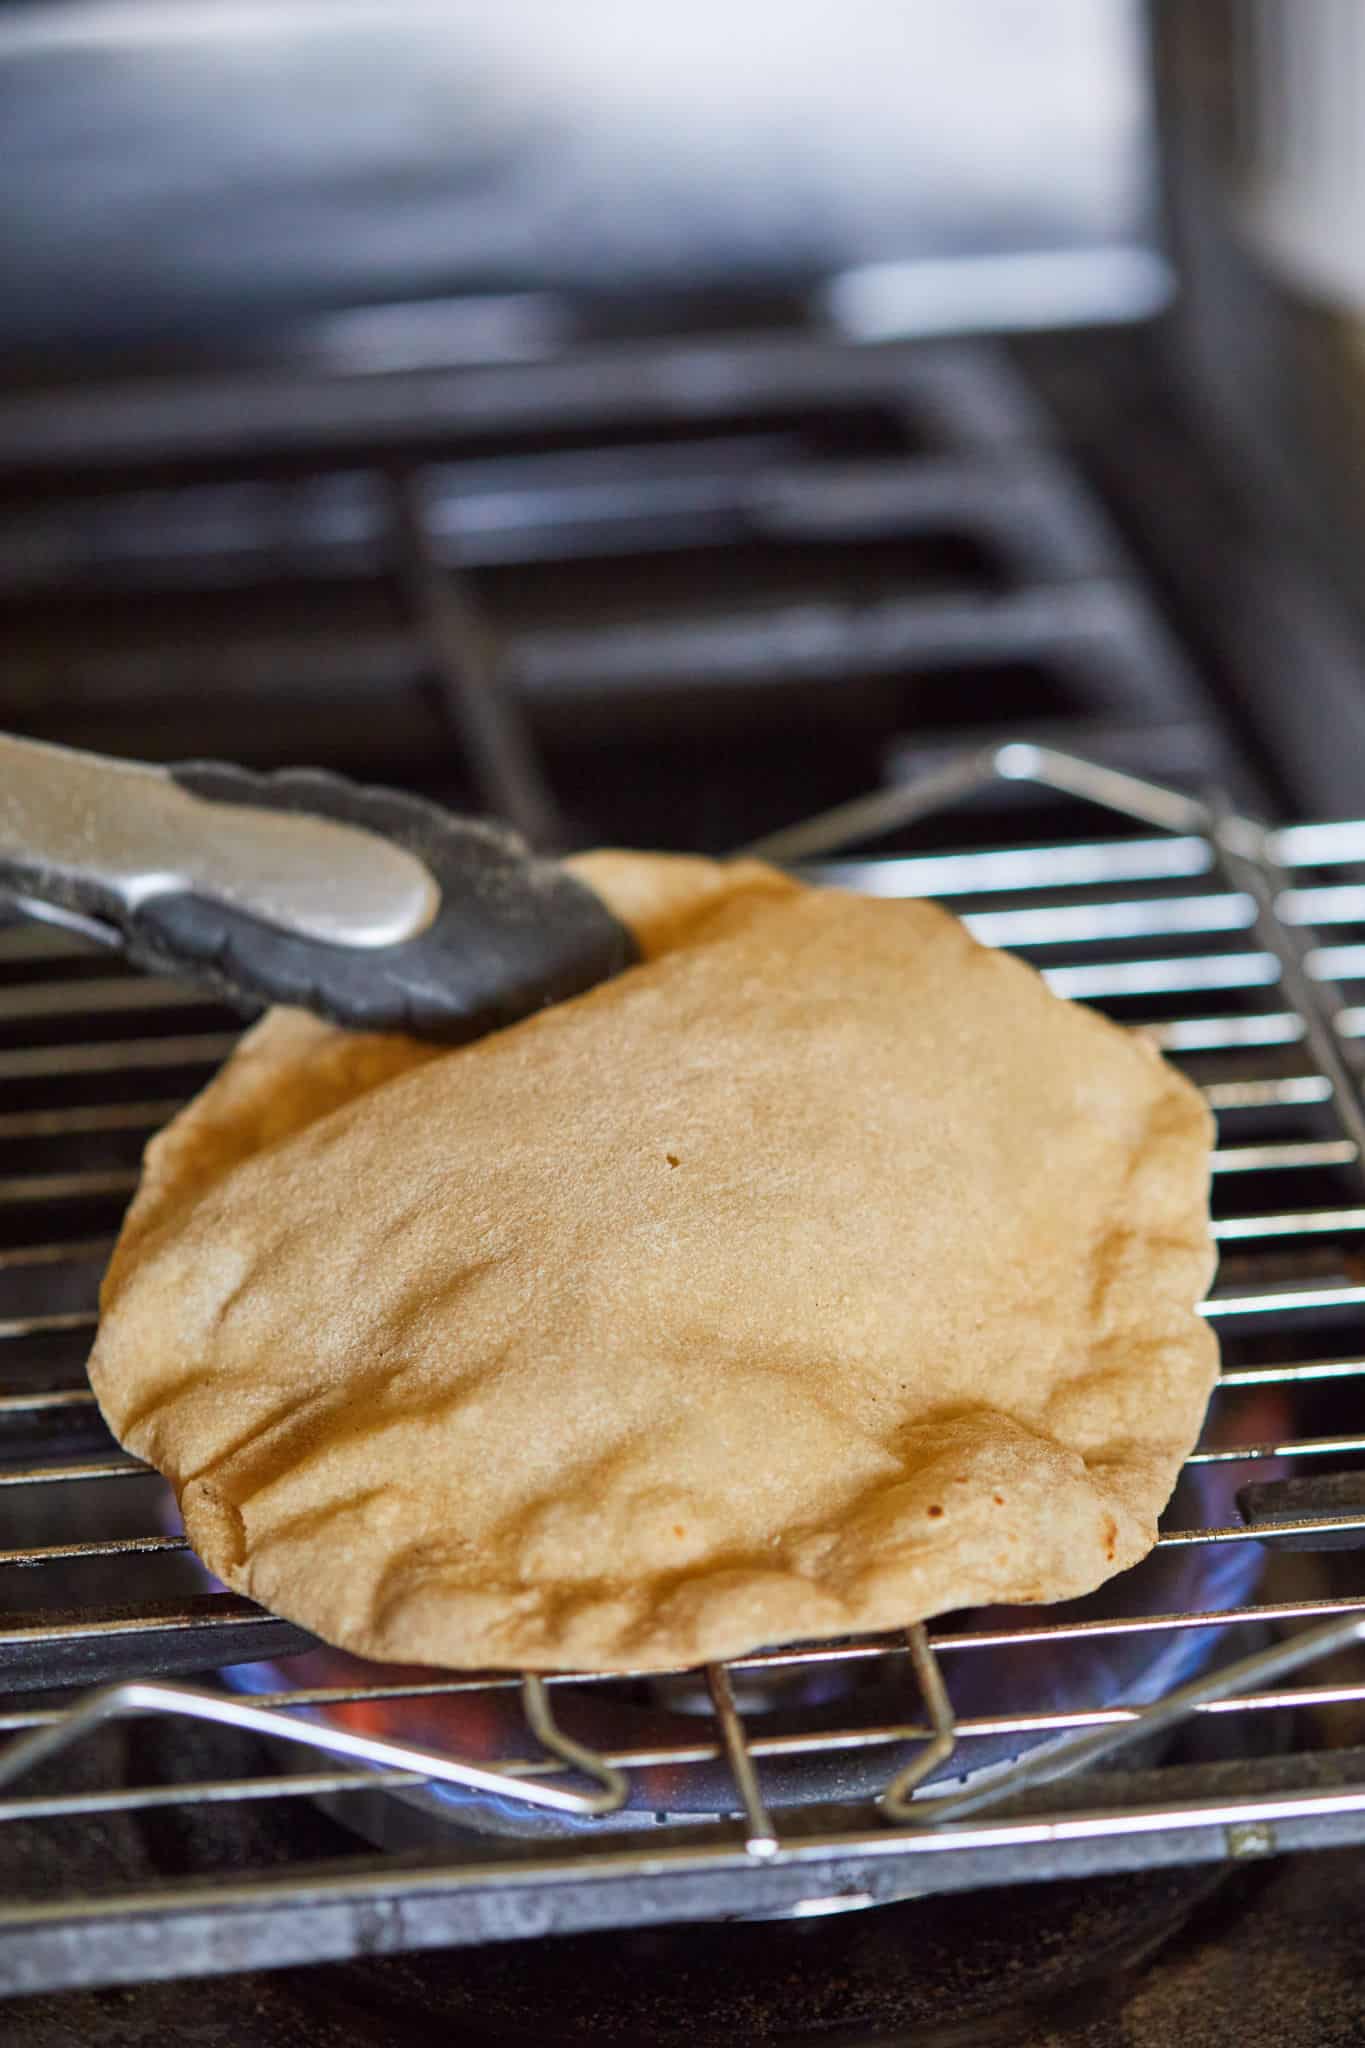 Roti being cooked over an open flame.